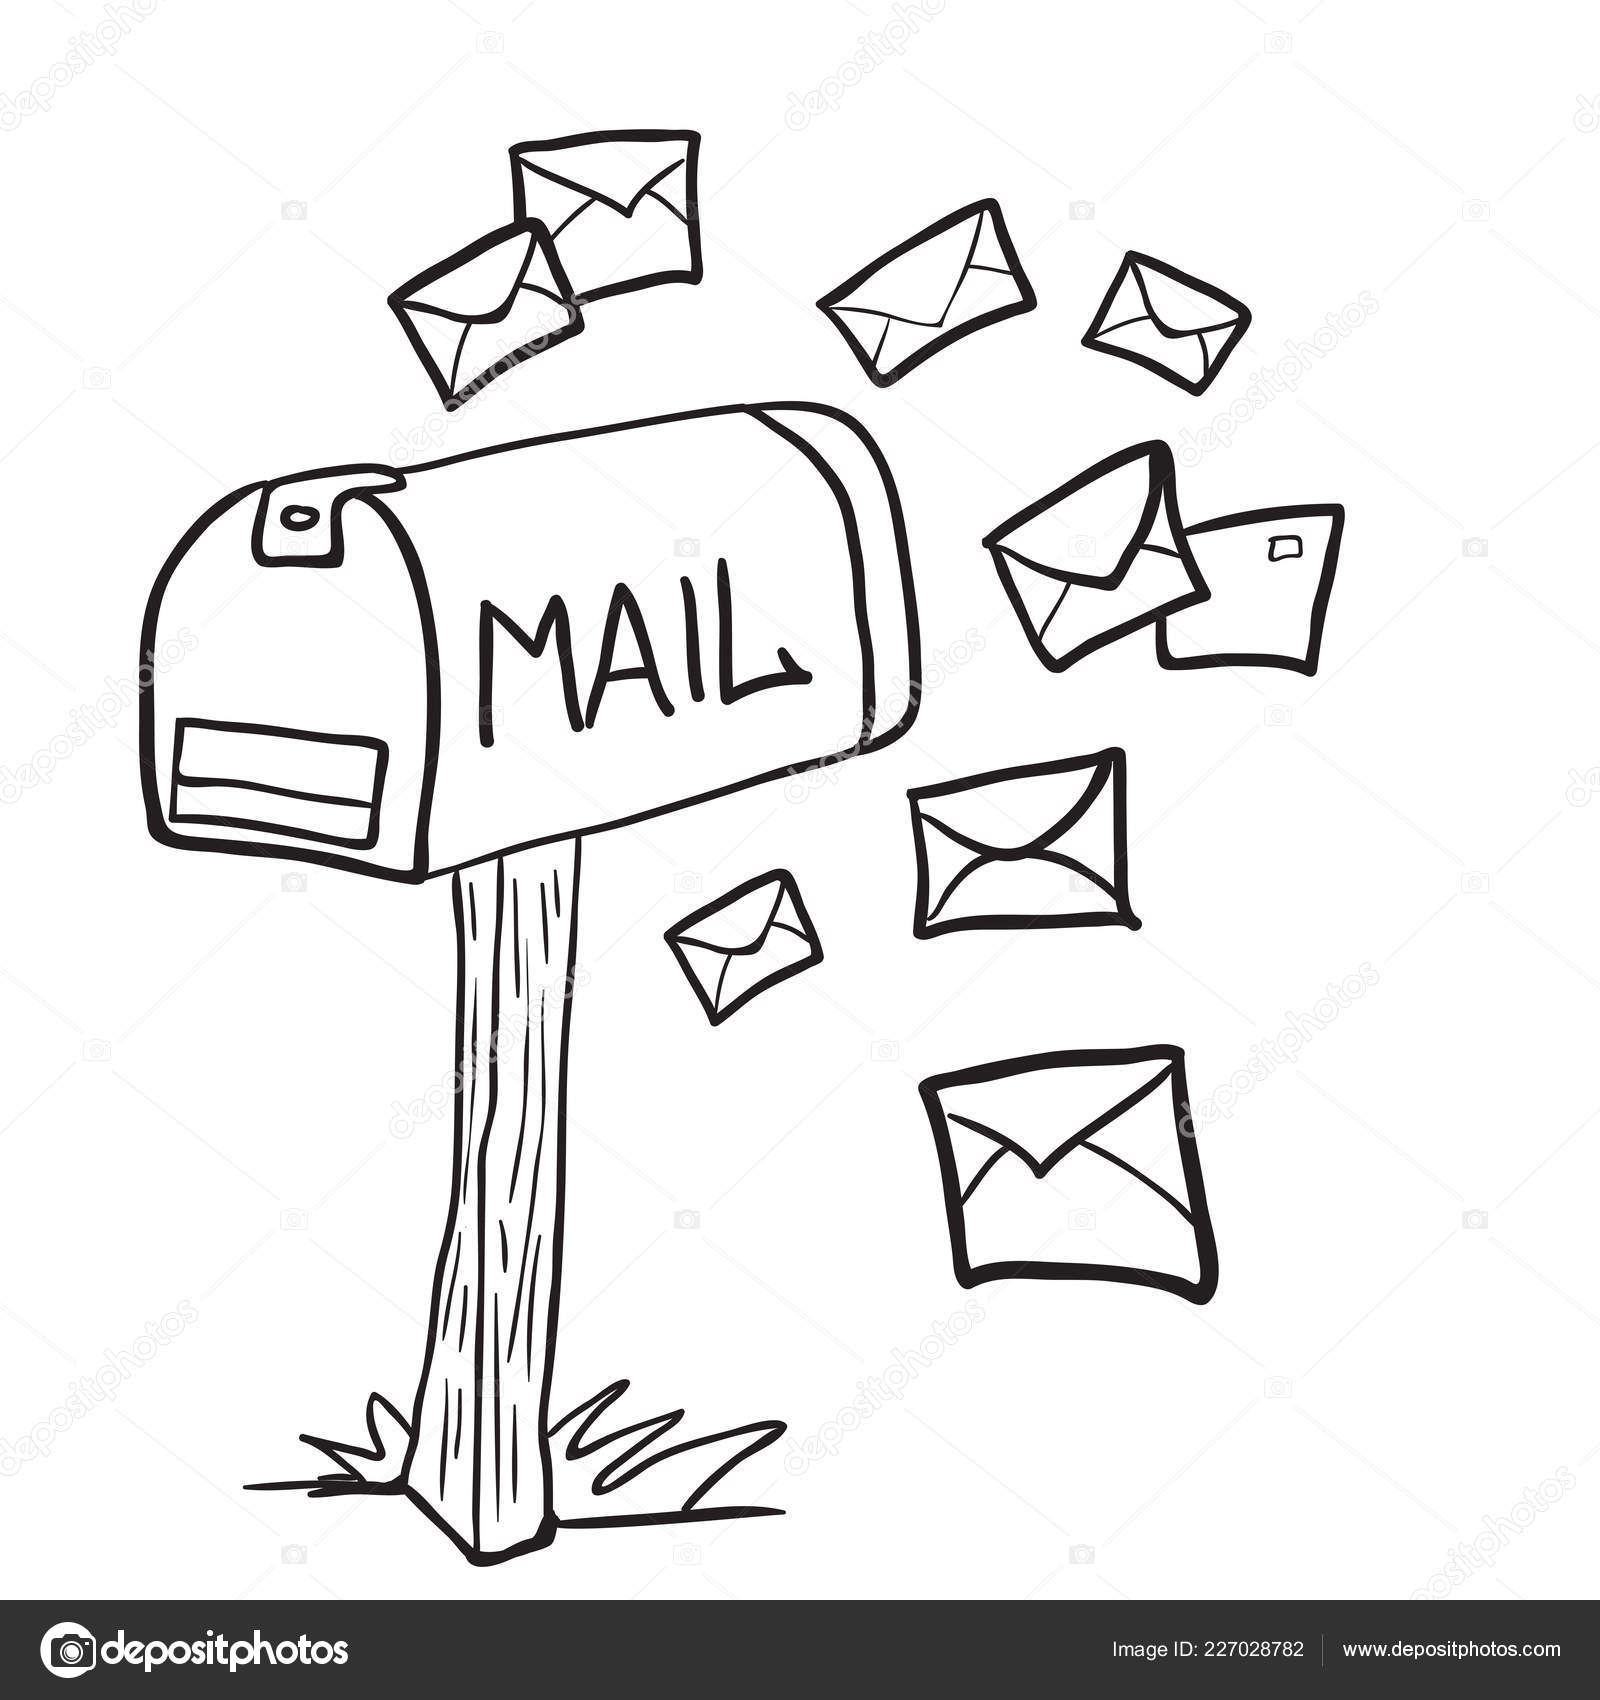 Download - Black and white mailbox with letters cartoon illustration - Stoc...